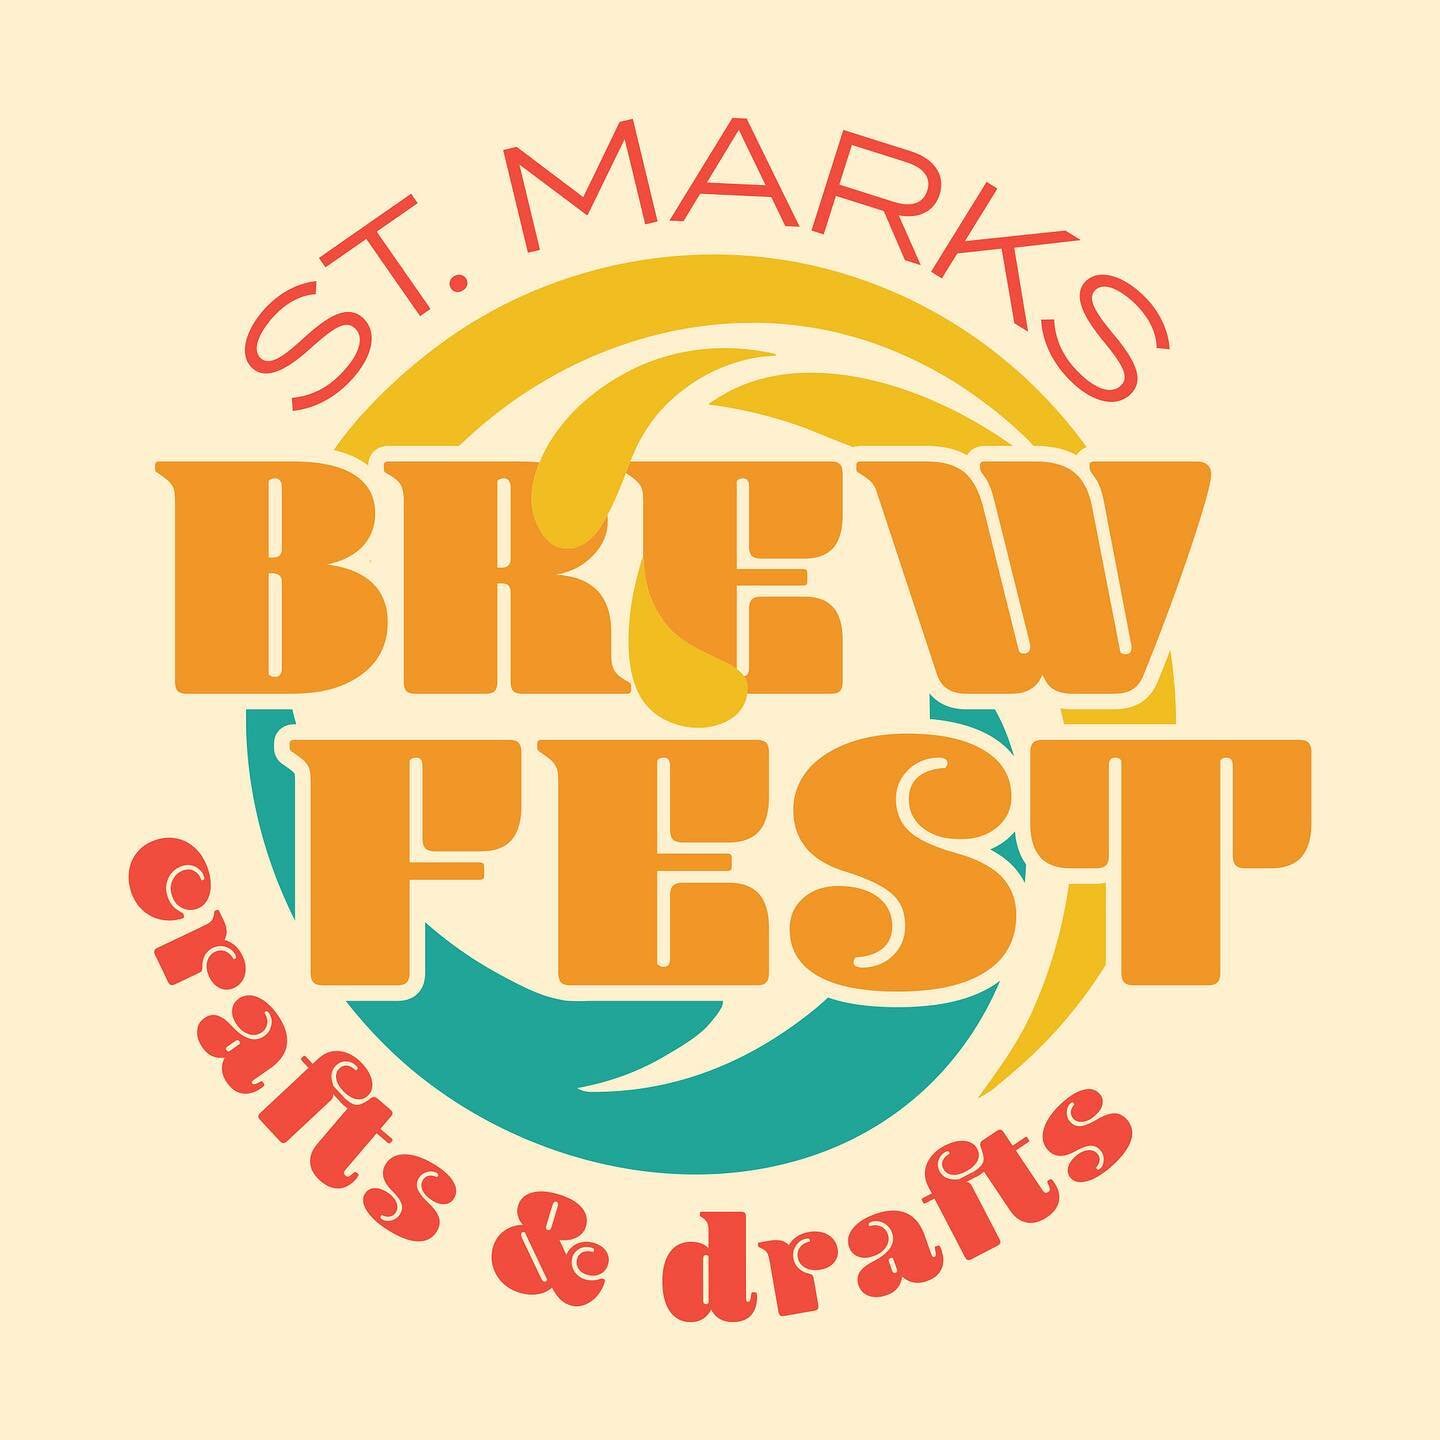 This Saturday is the first ever St. Marks Brew Fest! It brings crafts &amp; drafts together with beers on tap and an arts &amp; crafts market, all in downtown St. Marks, Florida.